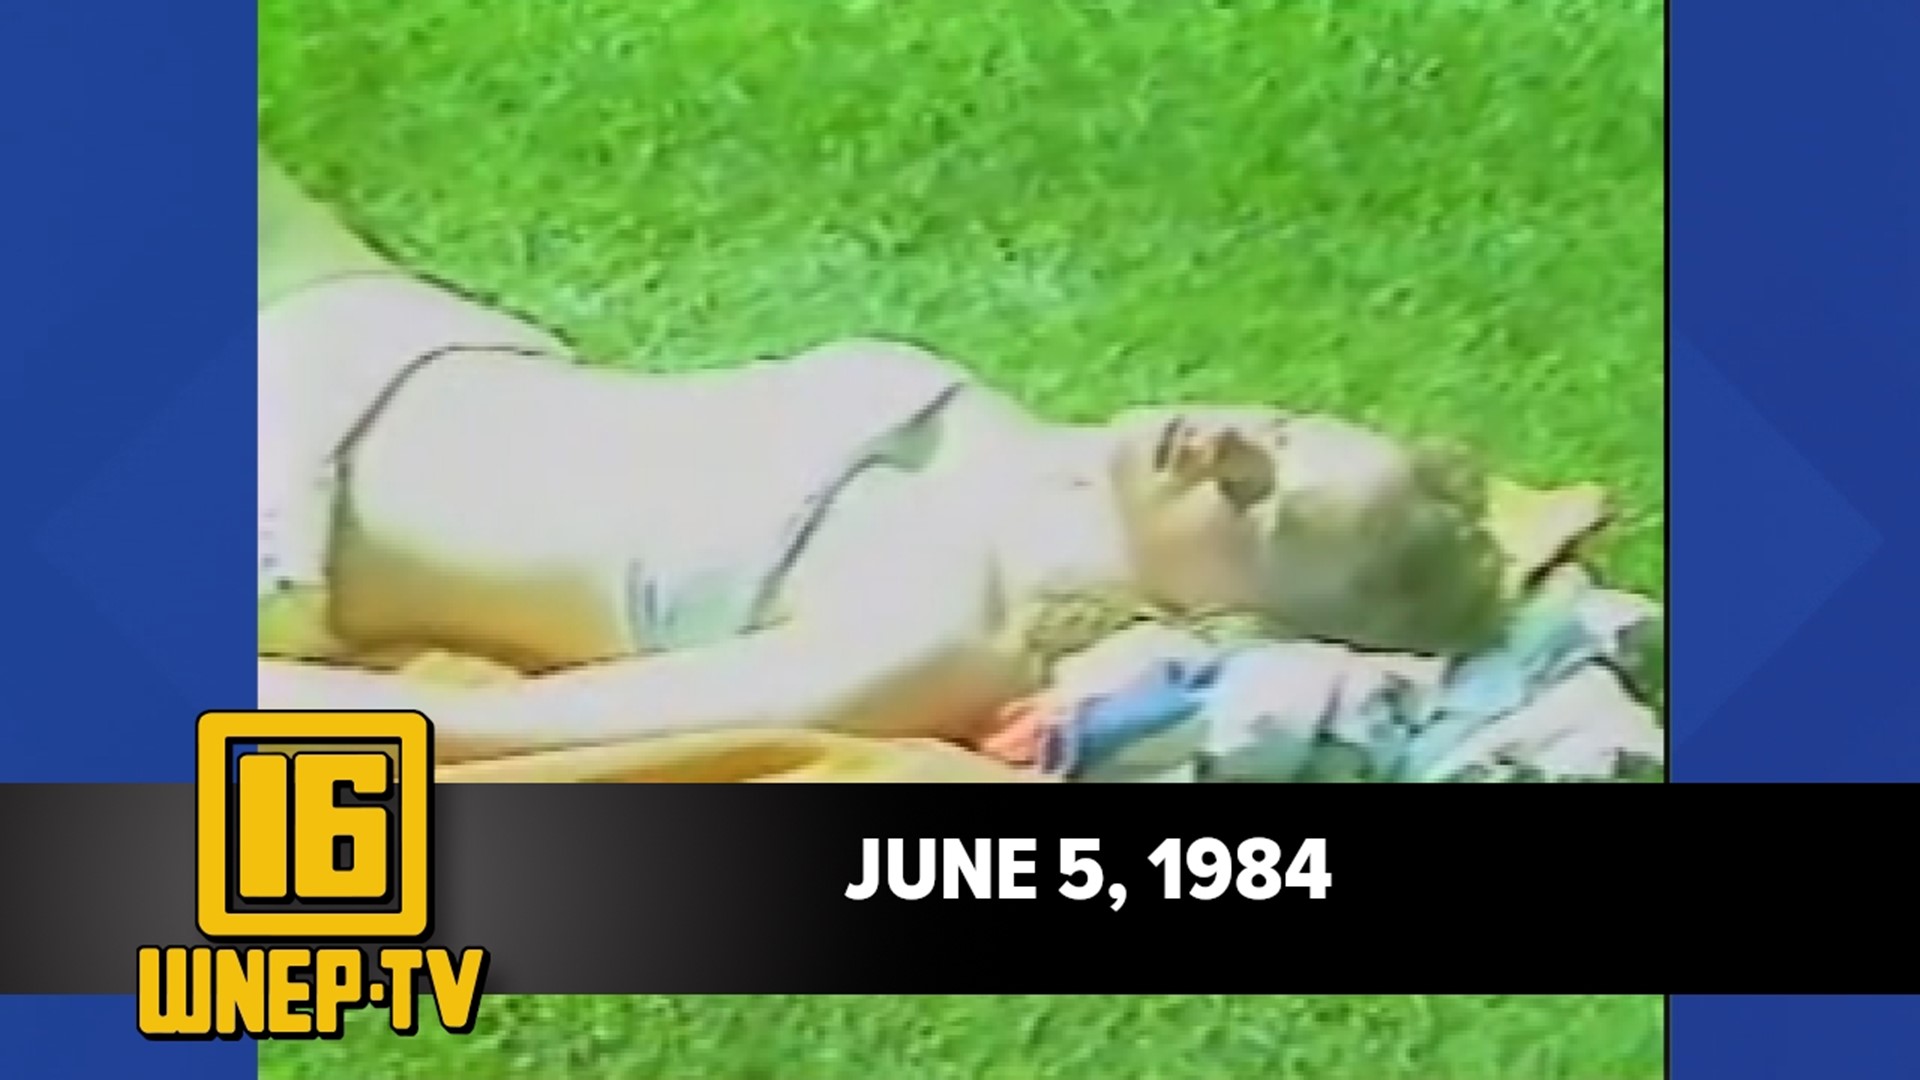 Join Karen Harch and Nolan Johannes with curated stories from June 5, 1984.